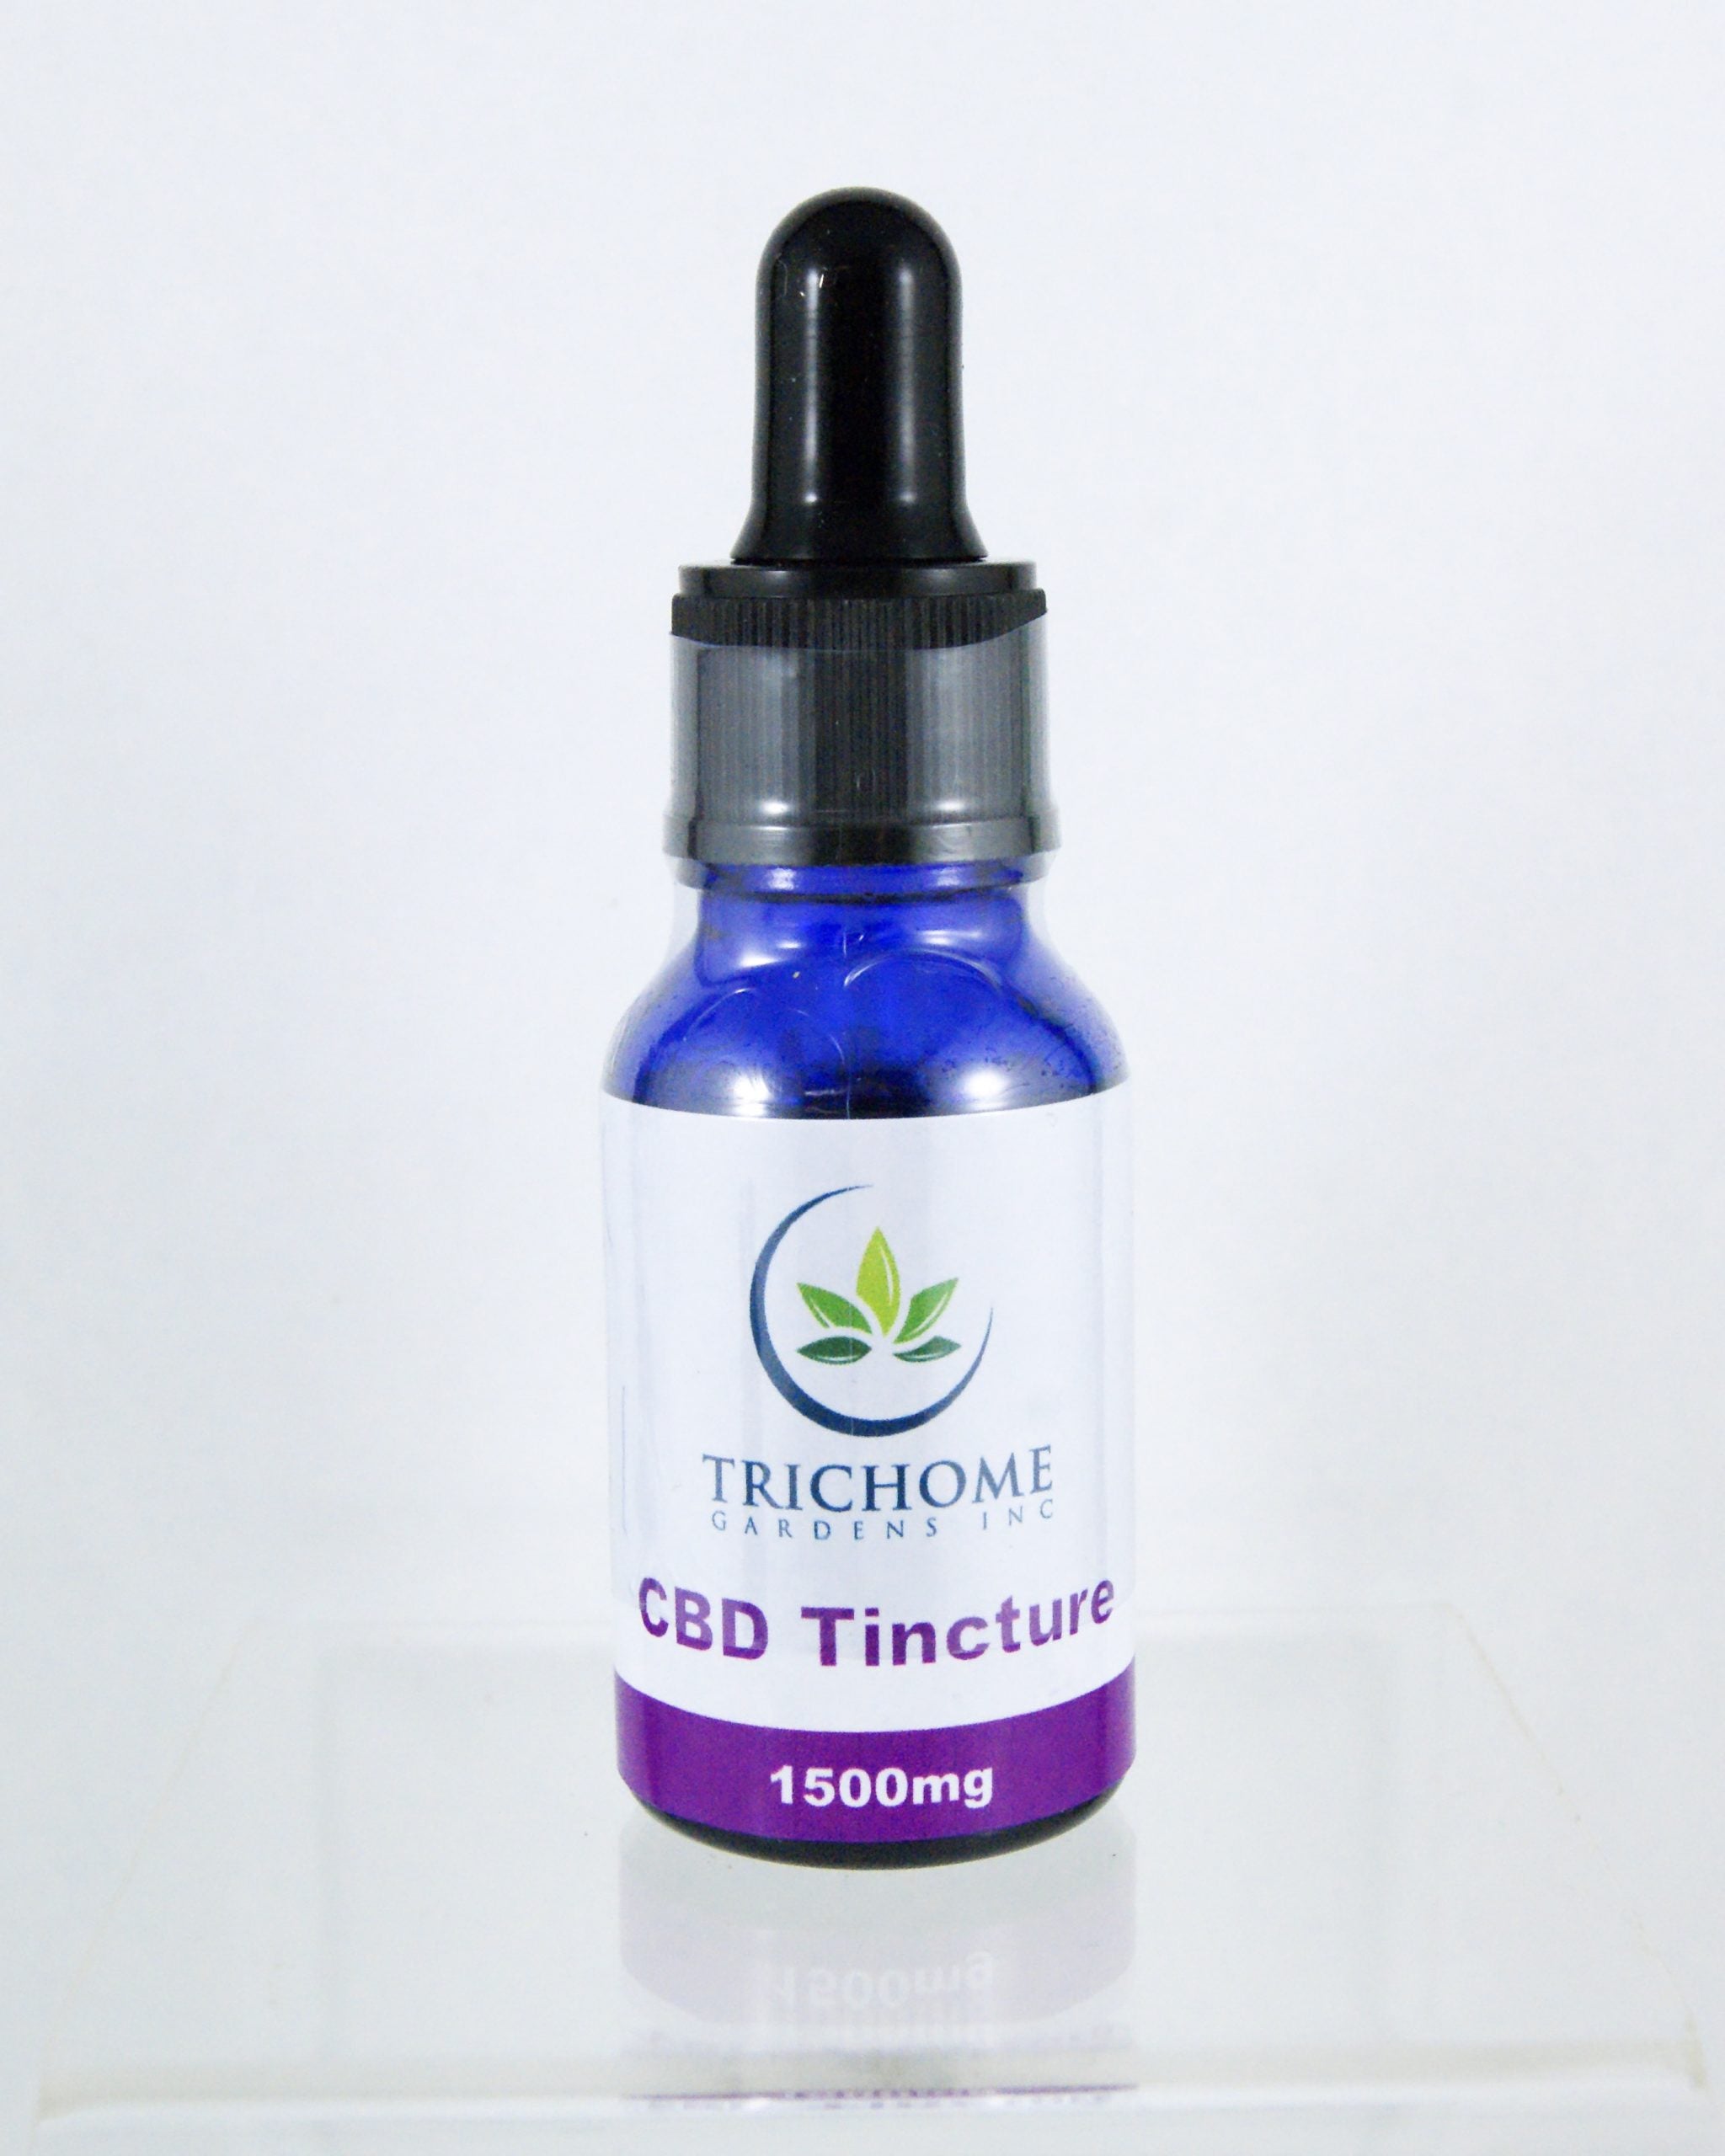 Trichome-CBD-Isolate-Tincture-1500mg-scaled